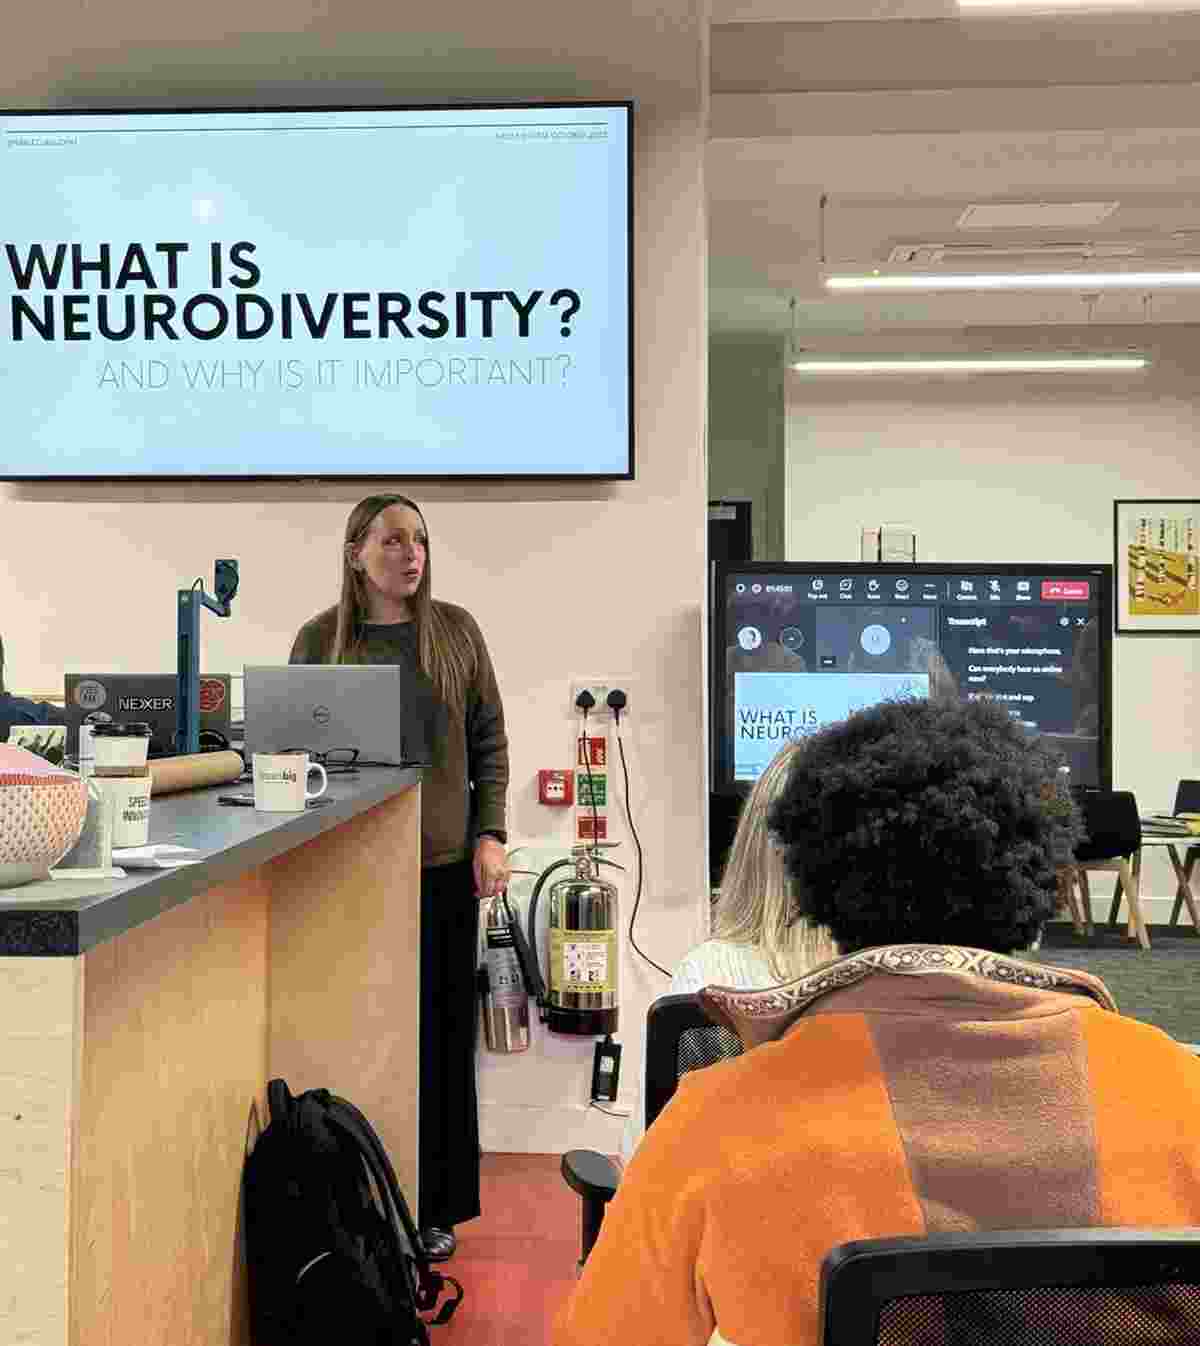 Neurodiversity consultant Rachel Morgan-Trimmer stands in the Nexer Digital office, presenting from a slide titled 'What is neurodiversity?'